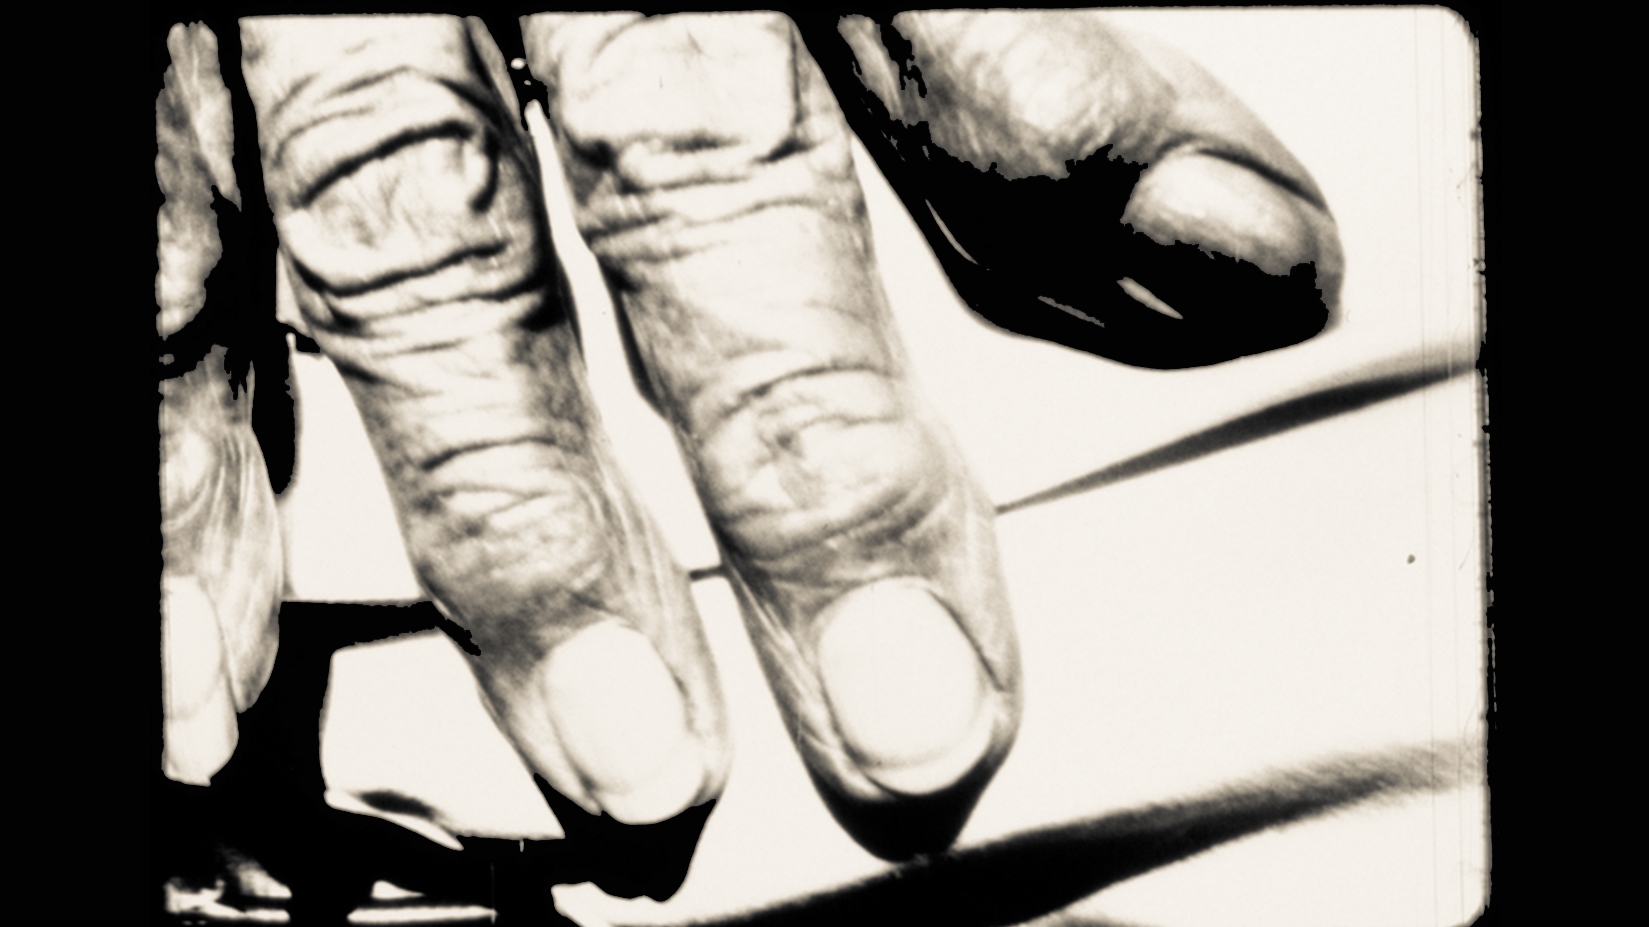 An up close black and white photo of four fingers of a hand